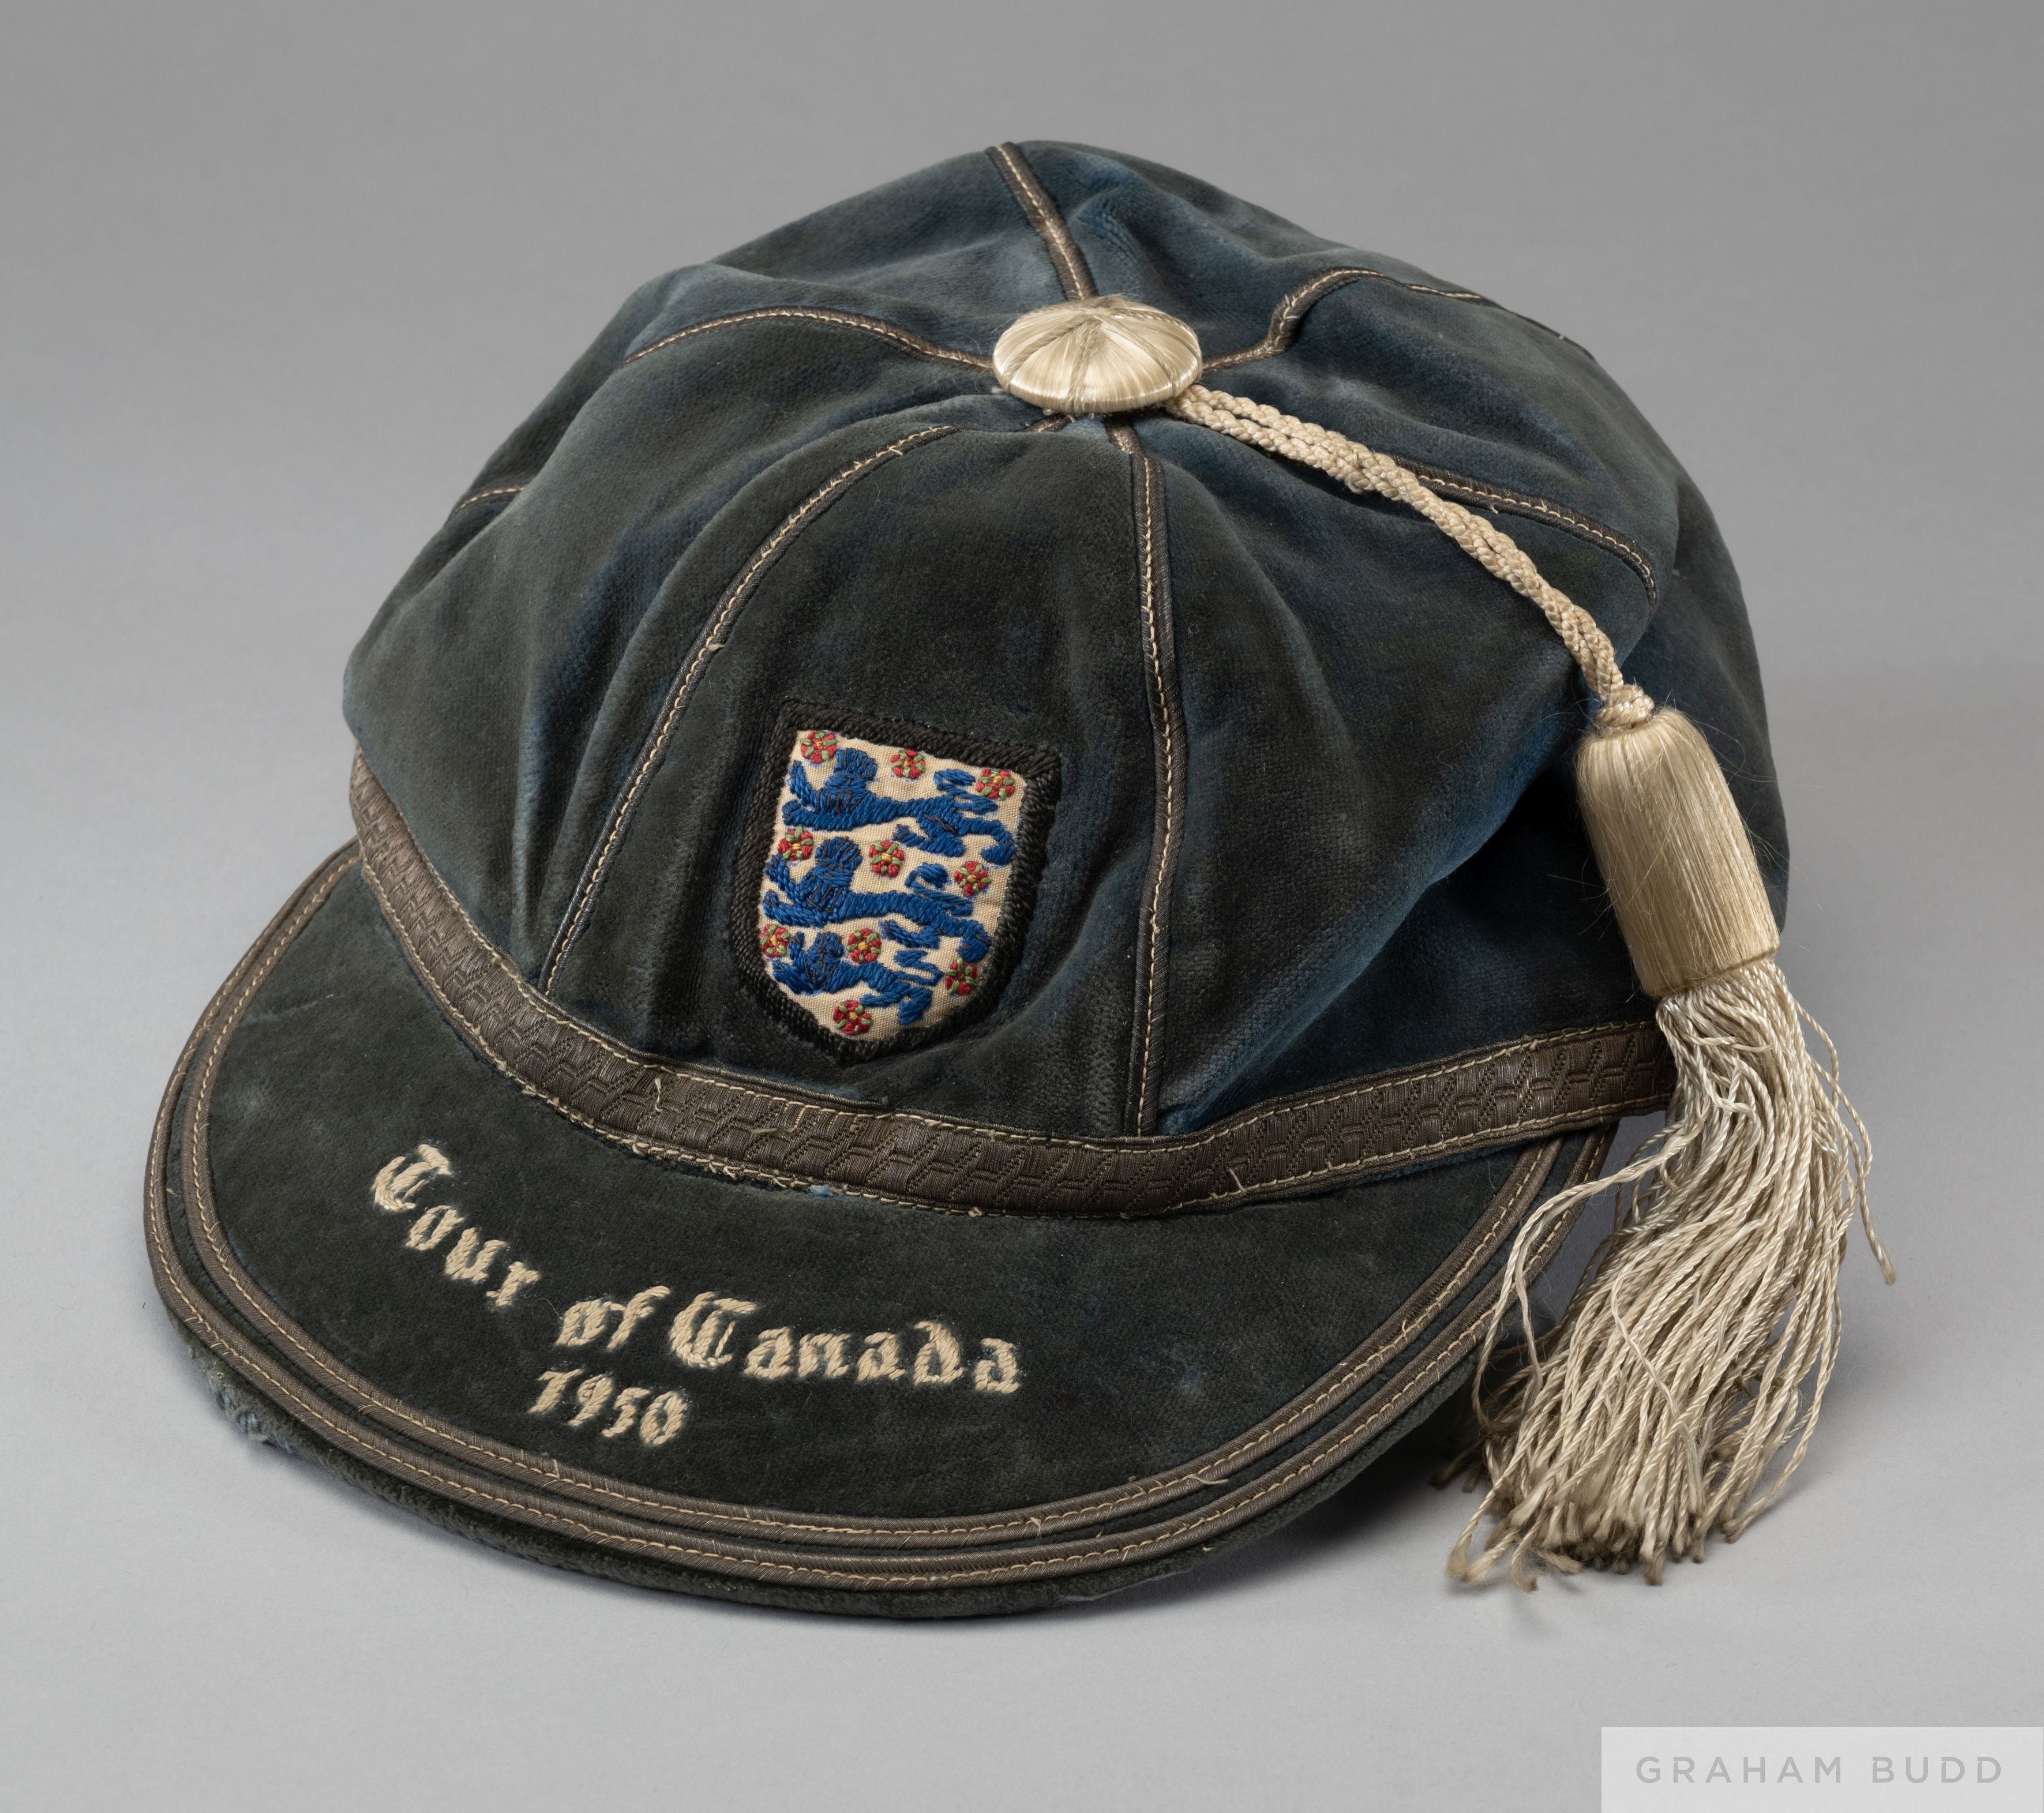 Stanley Matthews' international cap for the Football Association Tour of Canada in 1950,